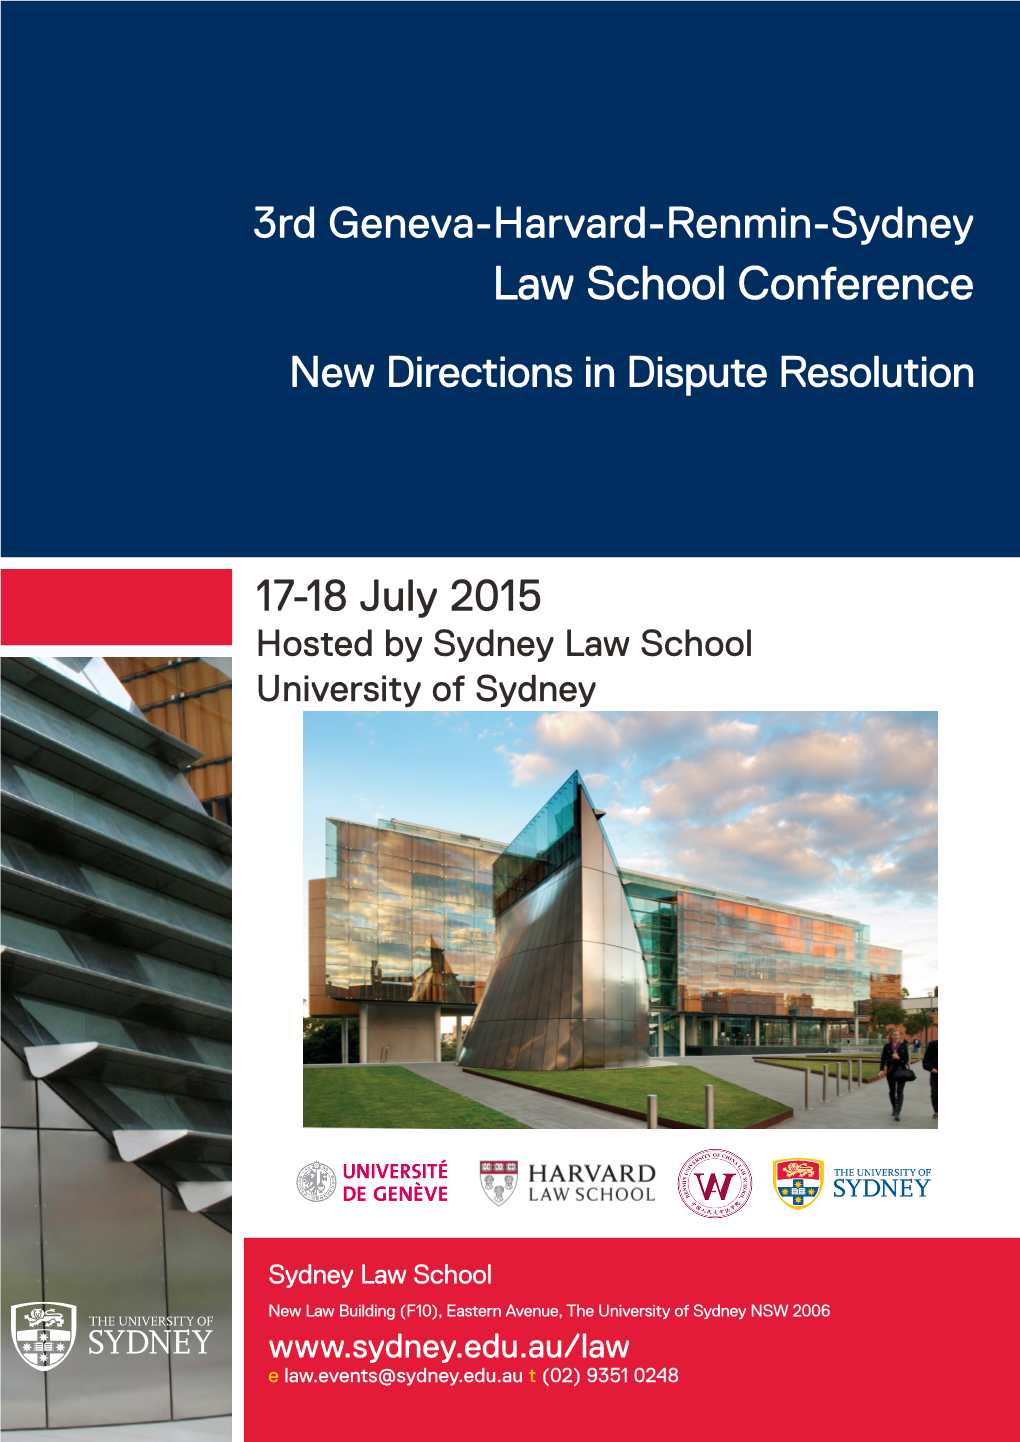 Law School Conference New Directions in Dispute Resolution